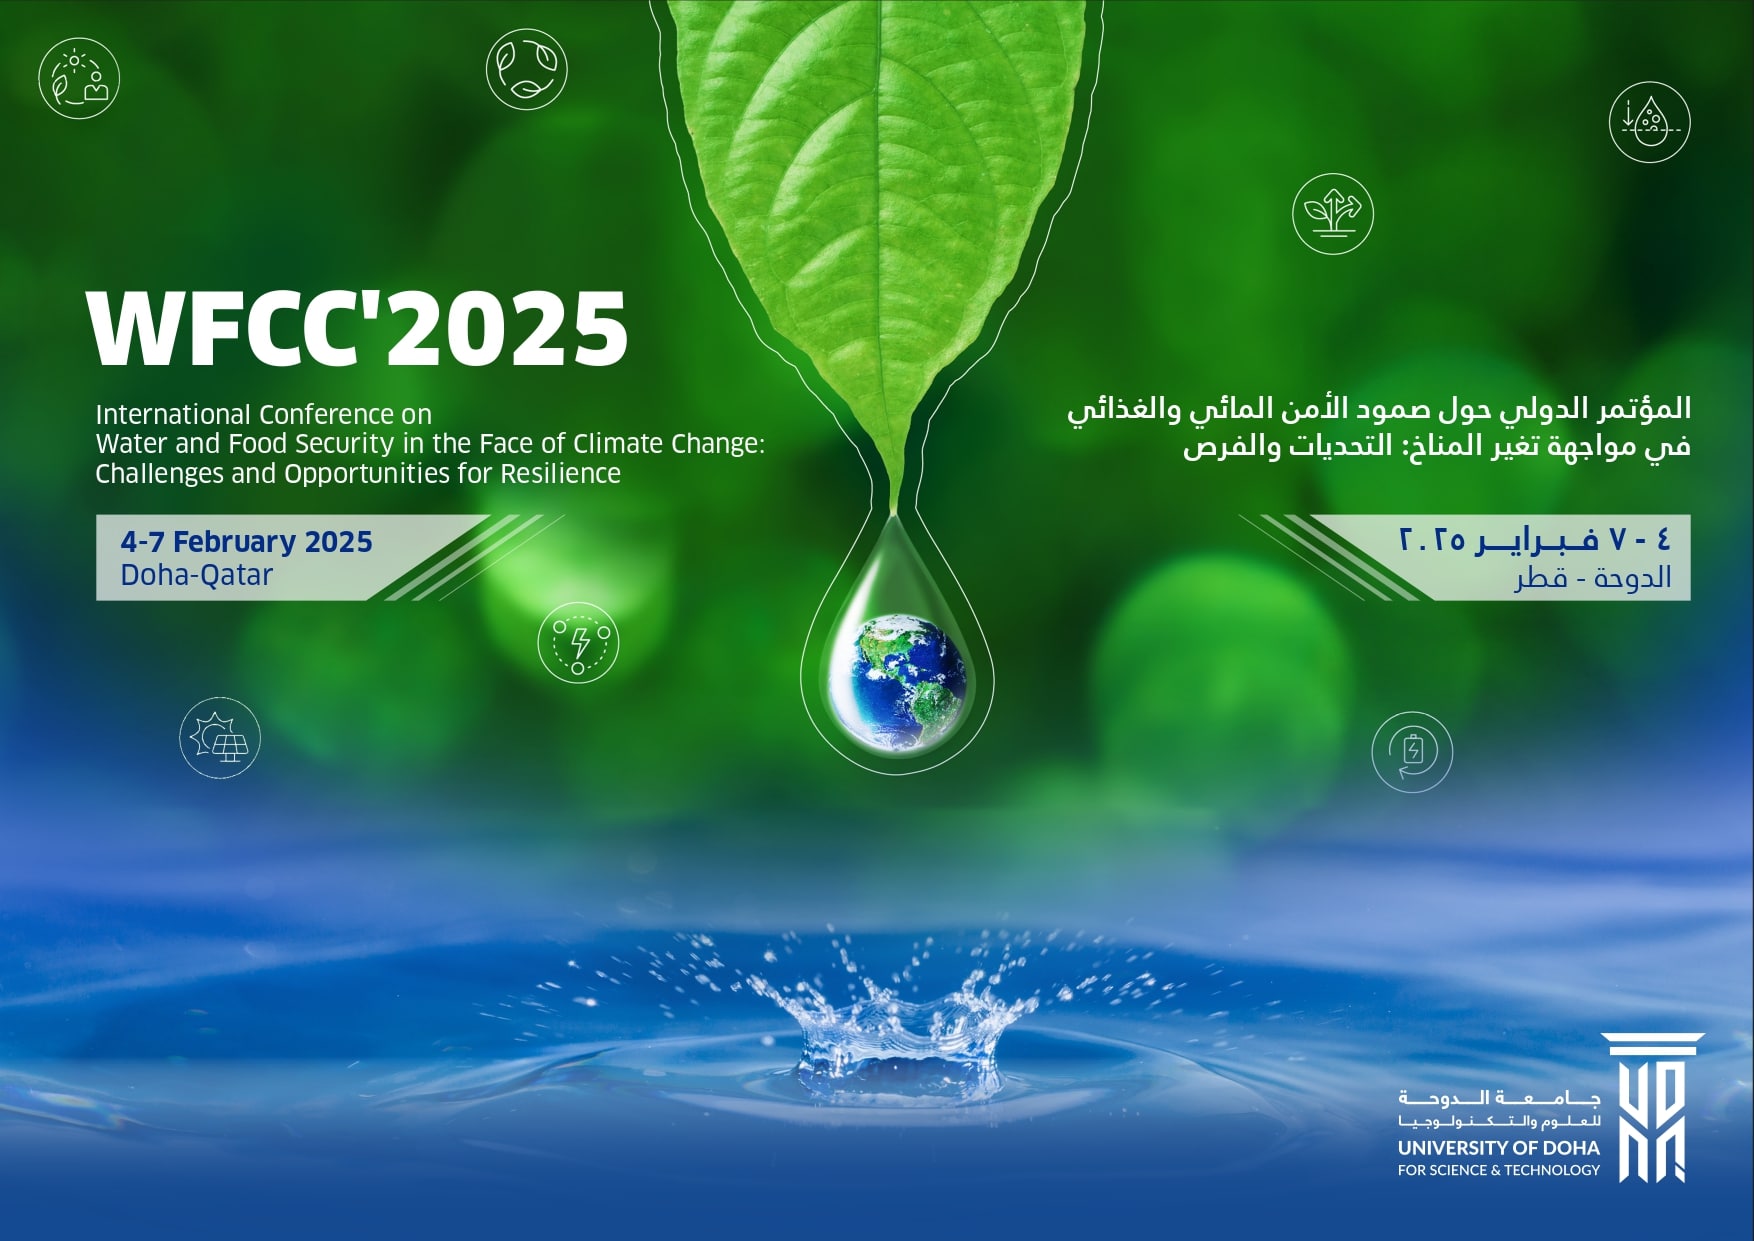 International Conference on Water and Food Security in the Face of Climate Change: Challenges and Opportunities for Resilience